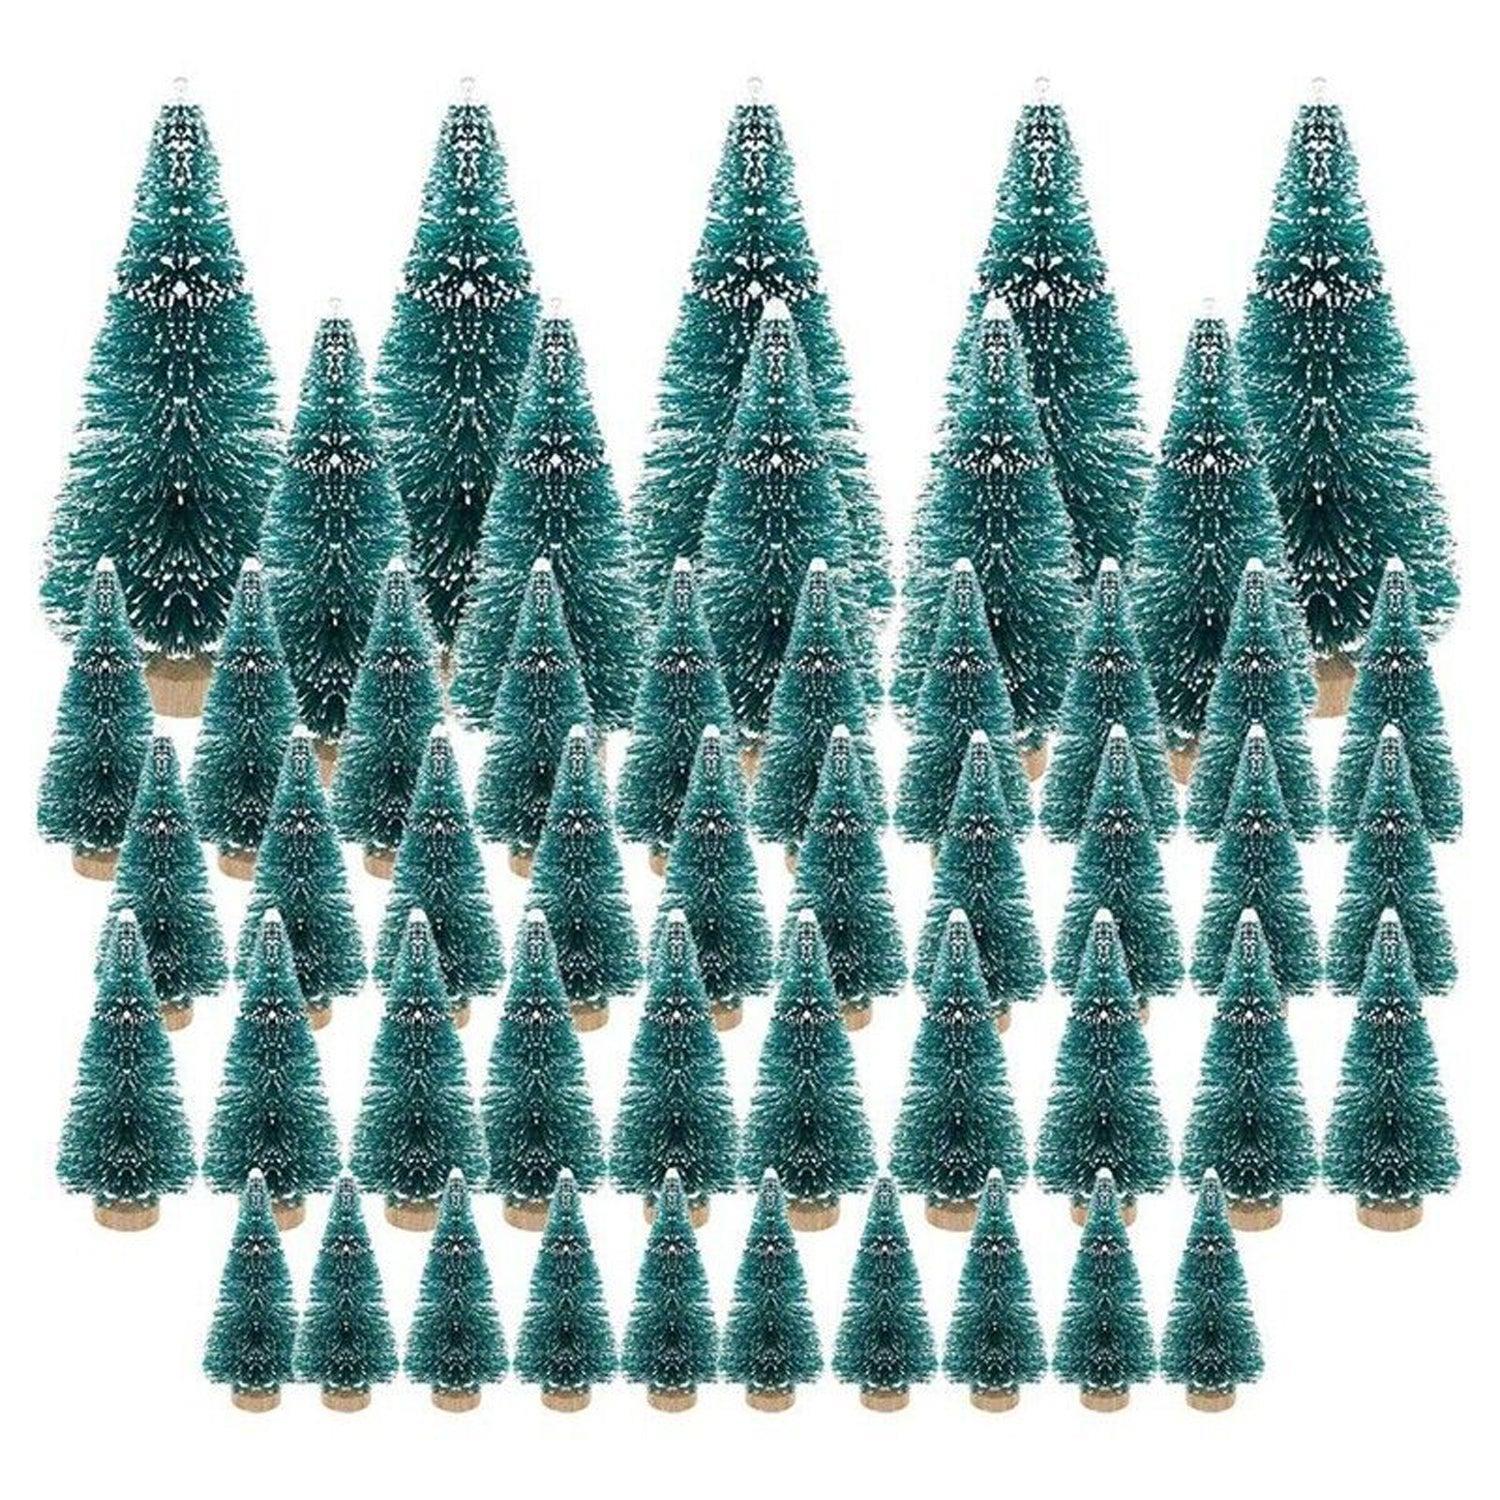 50PCS Miniature Artificial Christmas Tree Small Snow Frost Trees Pine Trees